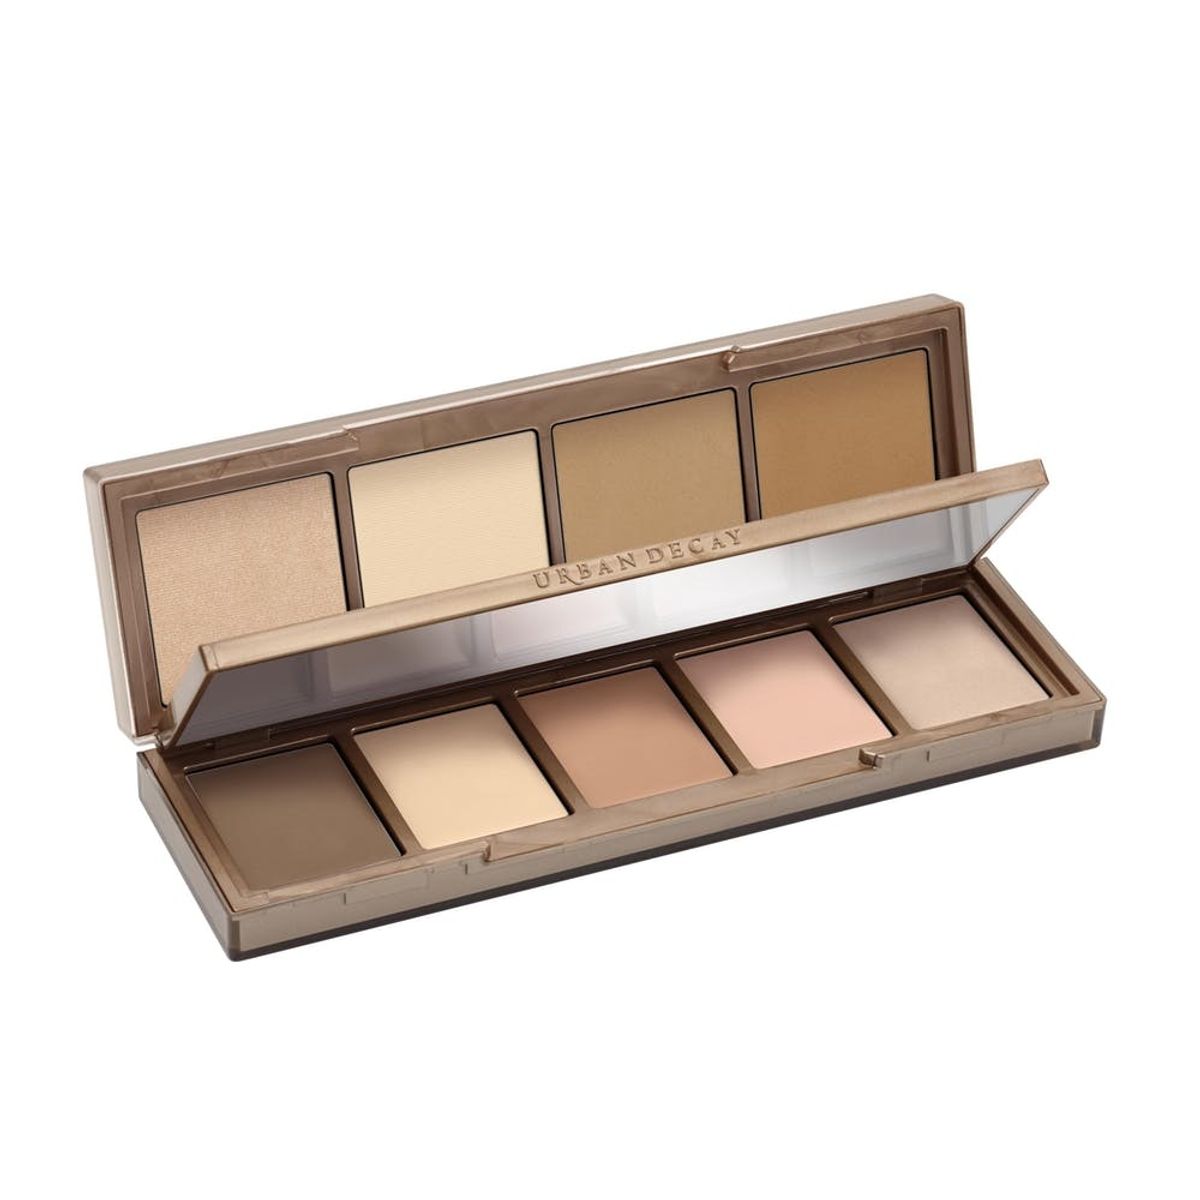 Urban Decay’s New Naked Contouring Palette Is Just What Your Makeup Bag Is Missing